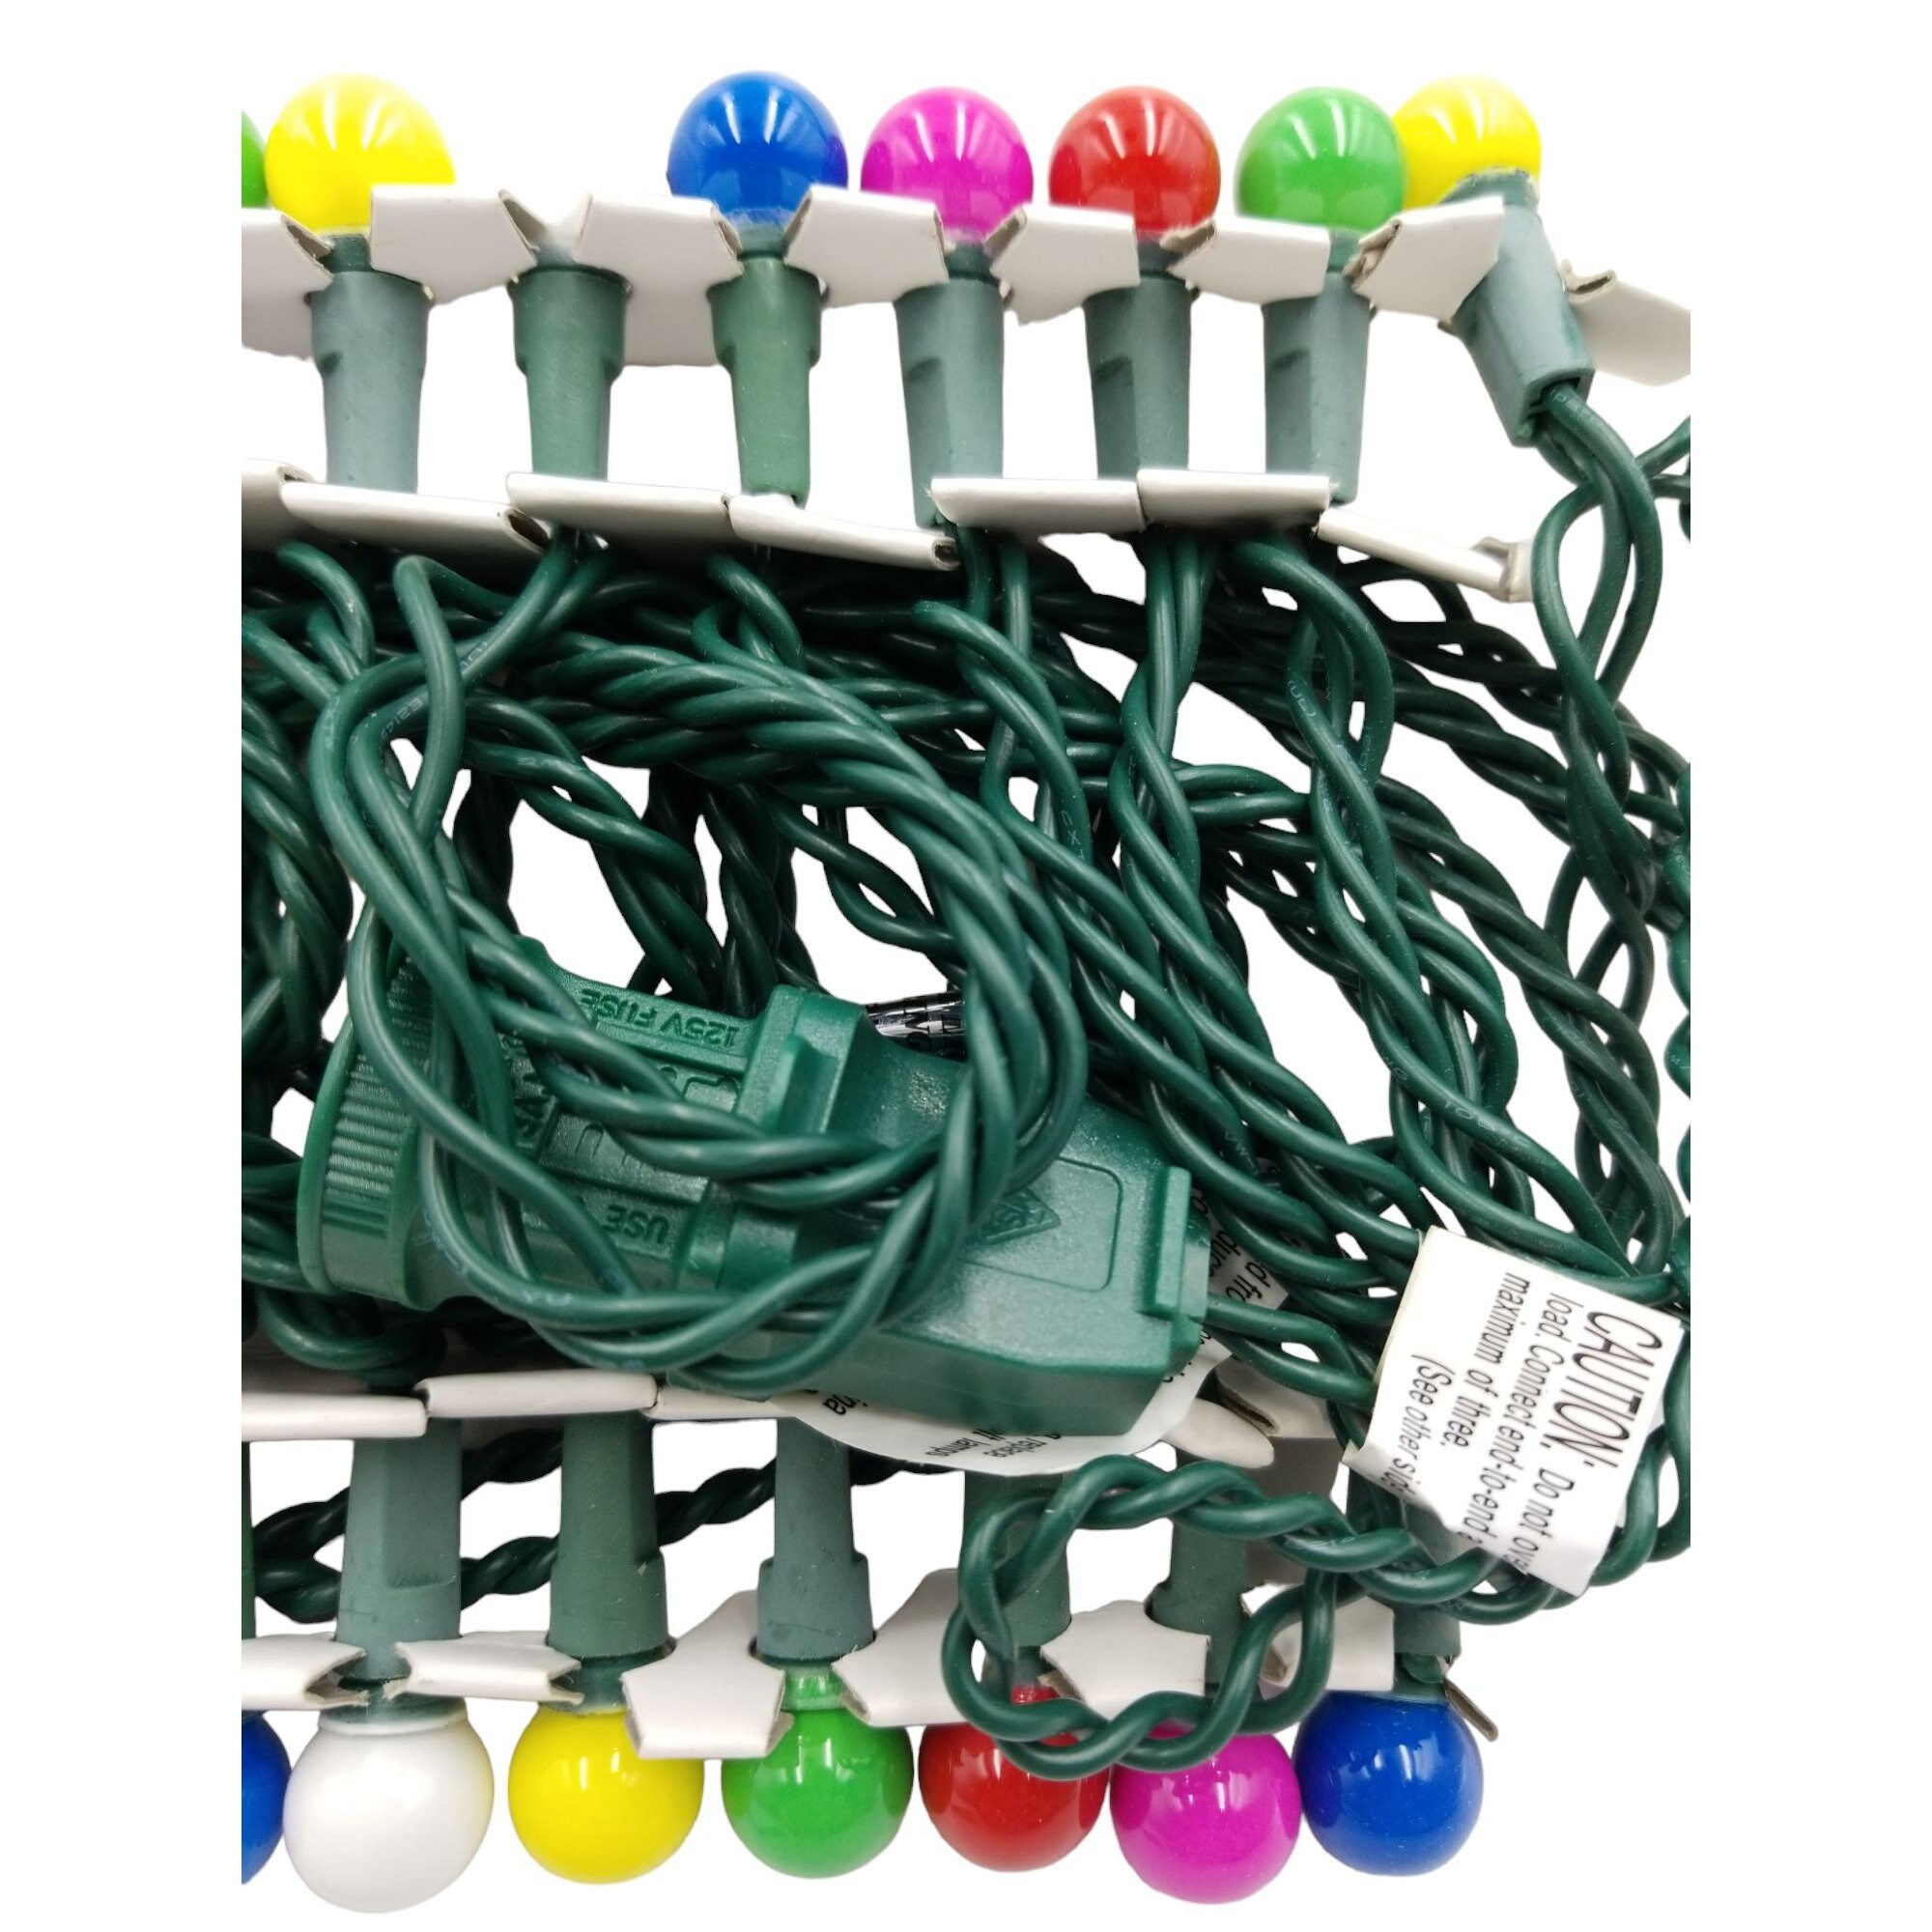 50-Count Sugar Coated LED Gumdrop Multi-Colored Christmas Light Strand